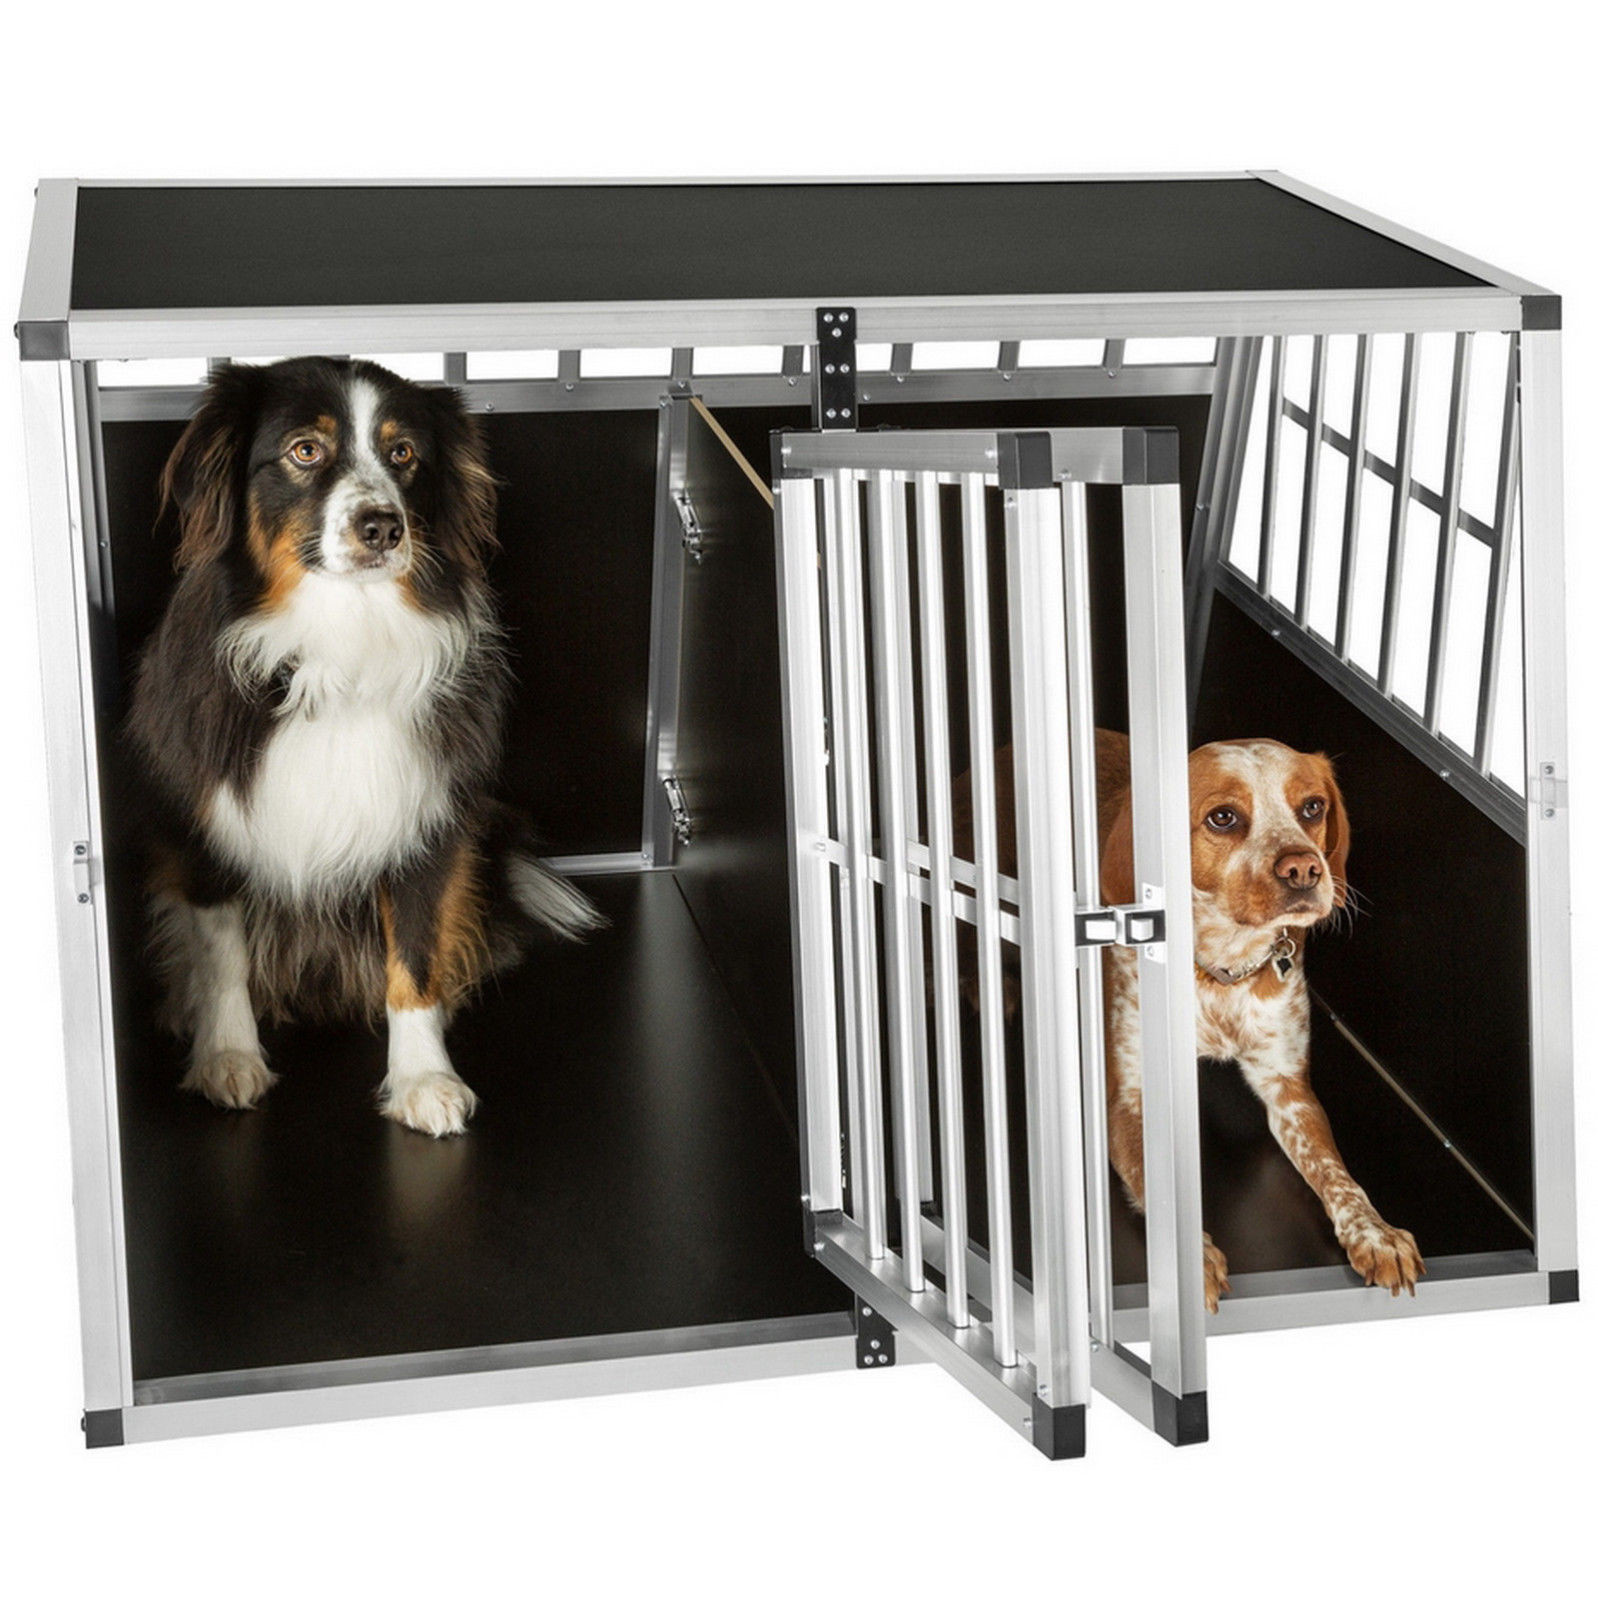 Dog Cage Kennel Large Extra Large Aluminum Metal Pets Kennel Car Transport Crate  ZX104B